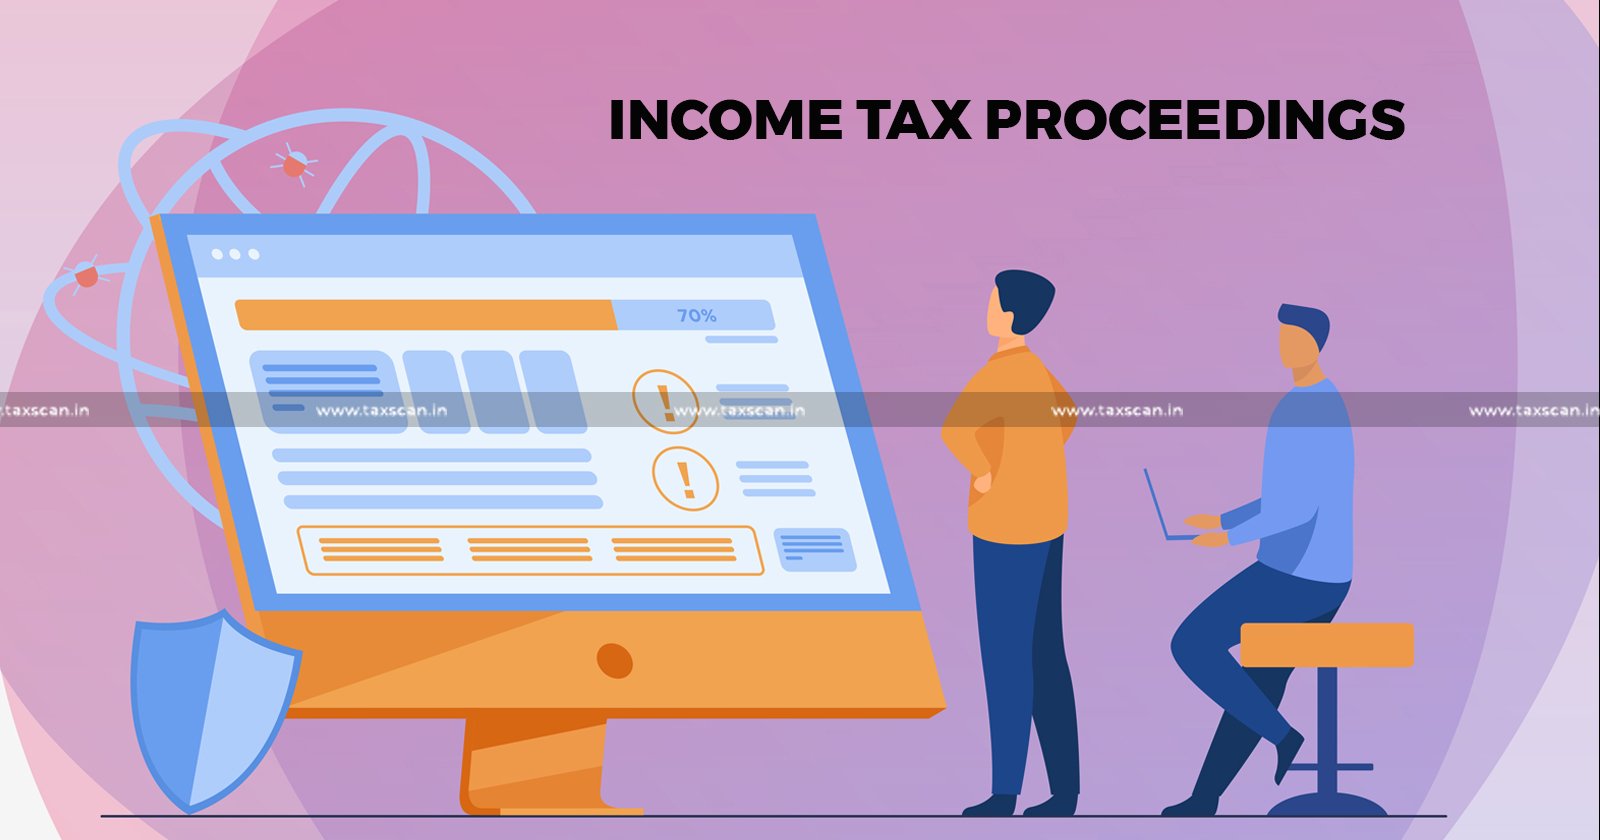 Income Tax Department - Income Tax Notice - notice - income - income tax - tax - reasons for income tax notice - reasons - taxscan